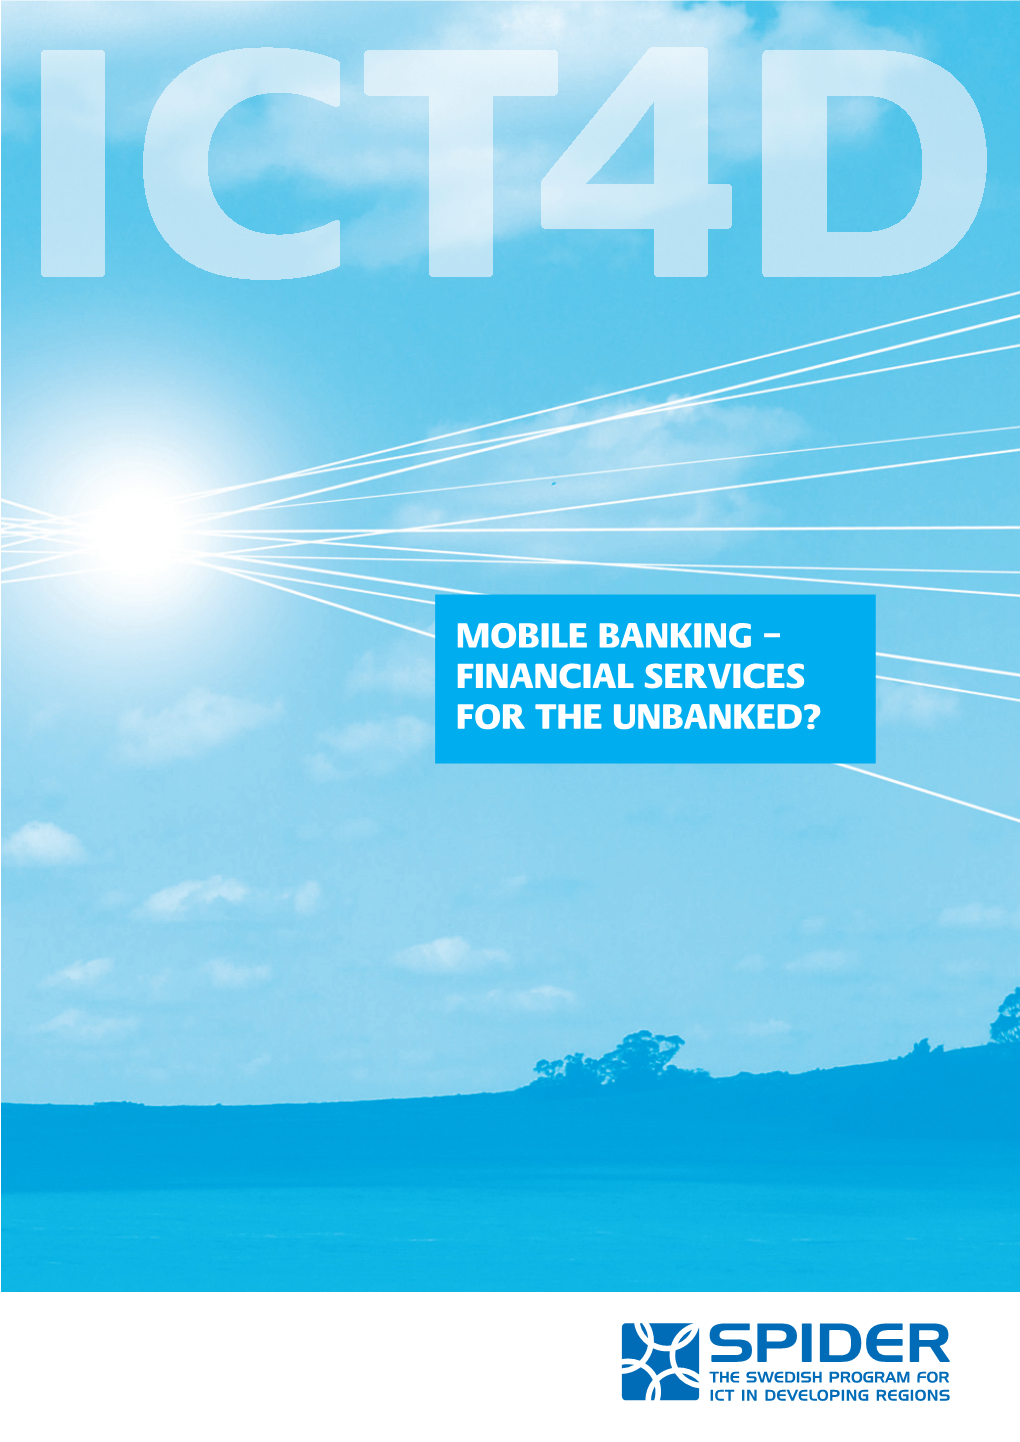 Mobile Banking – Financial Services for the Unbanked?